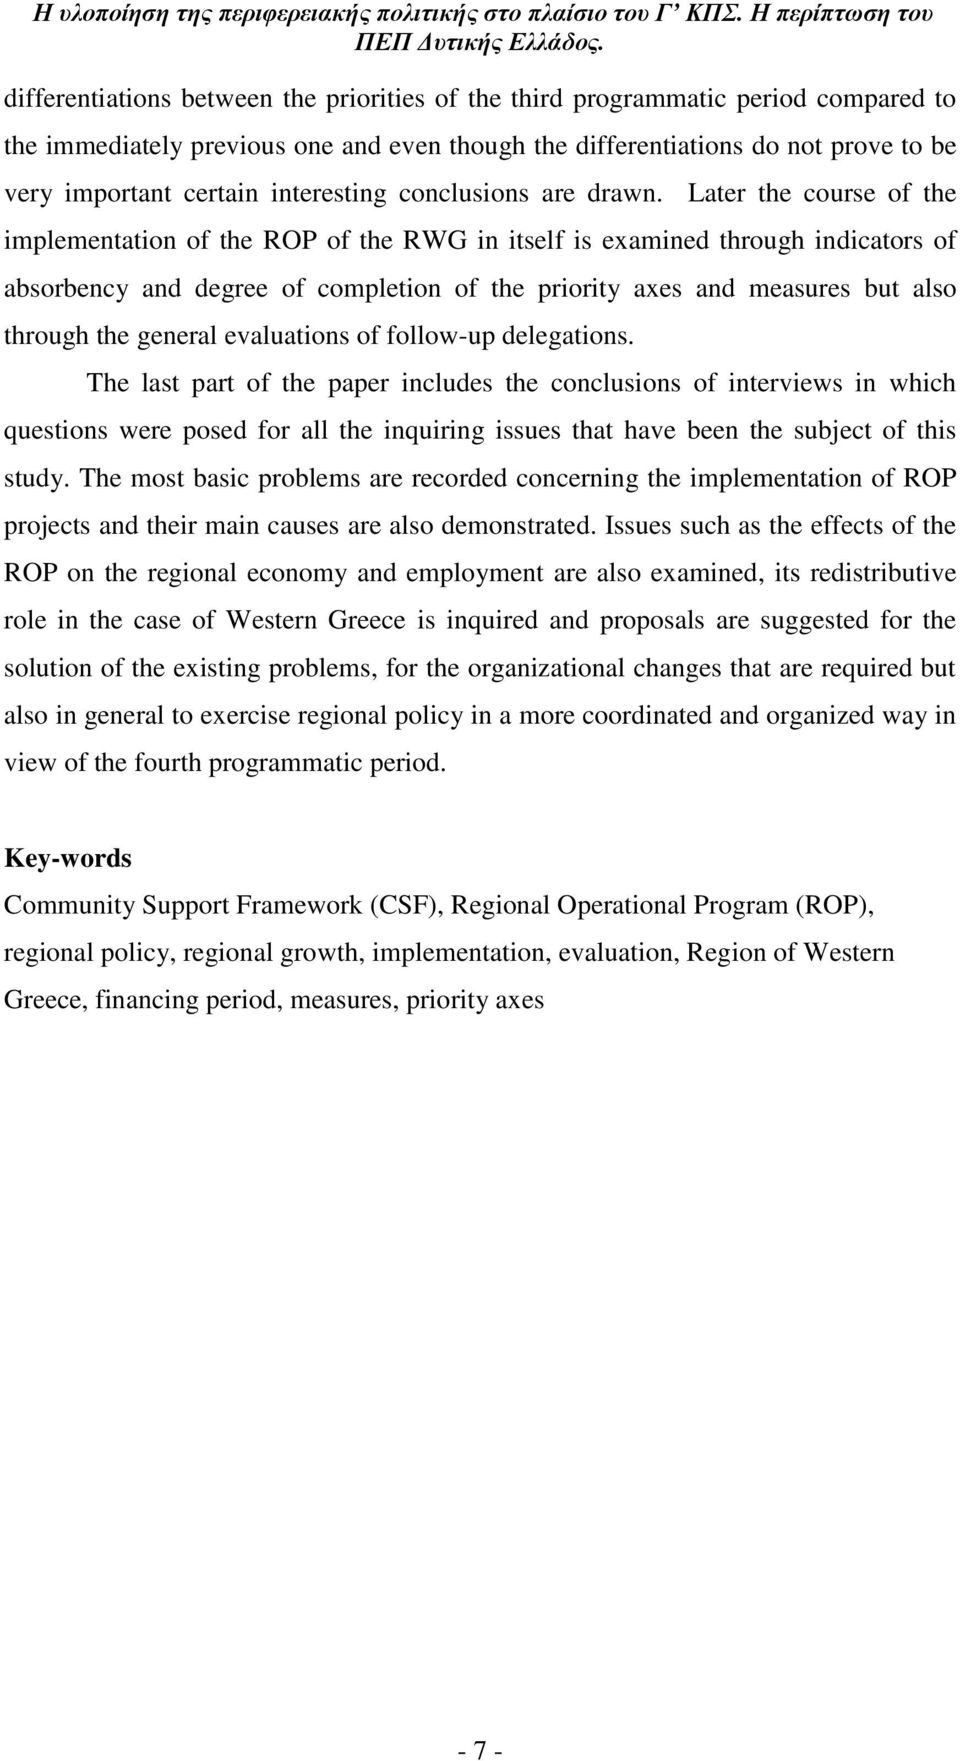 Later the course of the implementation of the ROP of the RWG in itself is examined through indicators of absorbency and degree of completion of the priority axes and measures but also through the